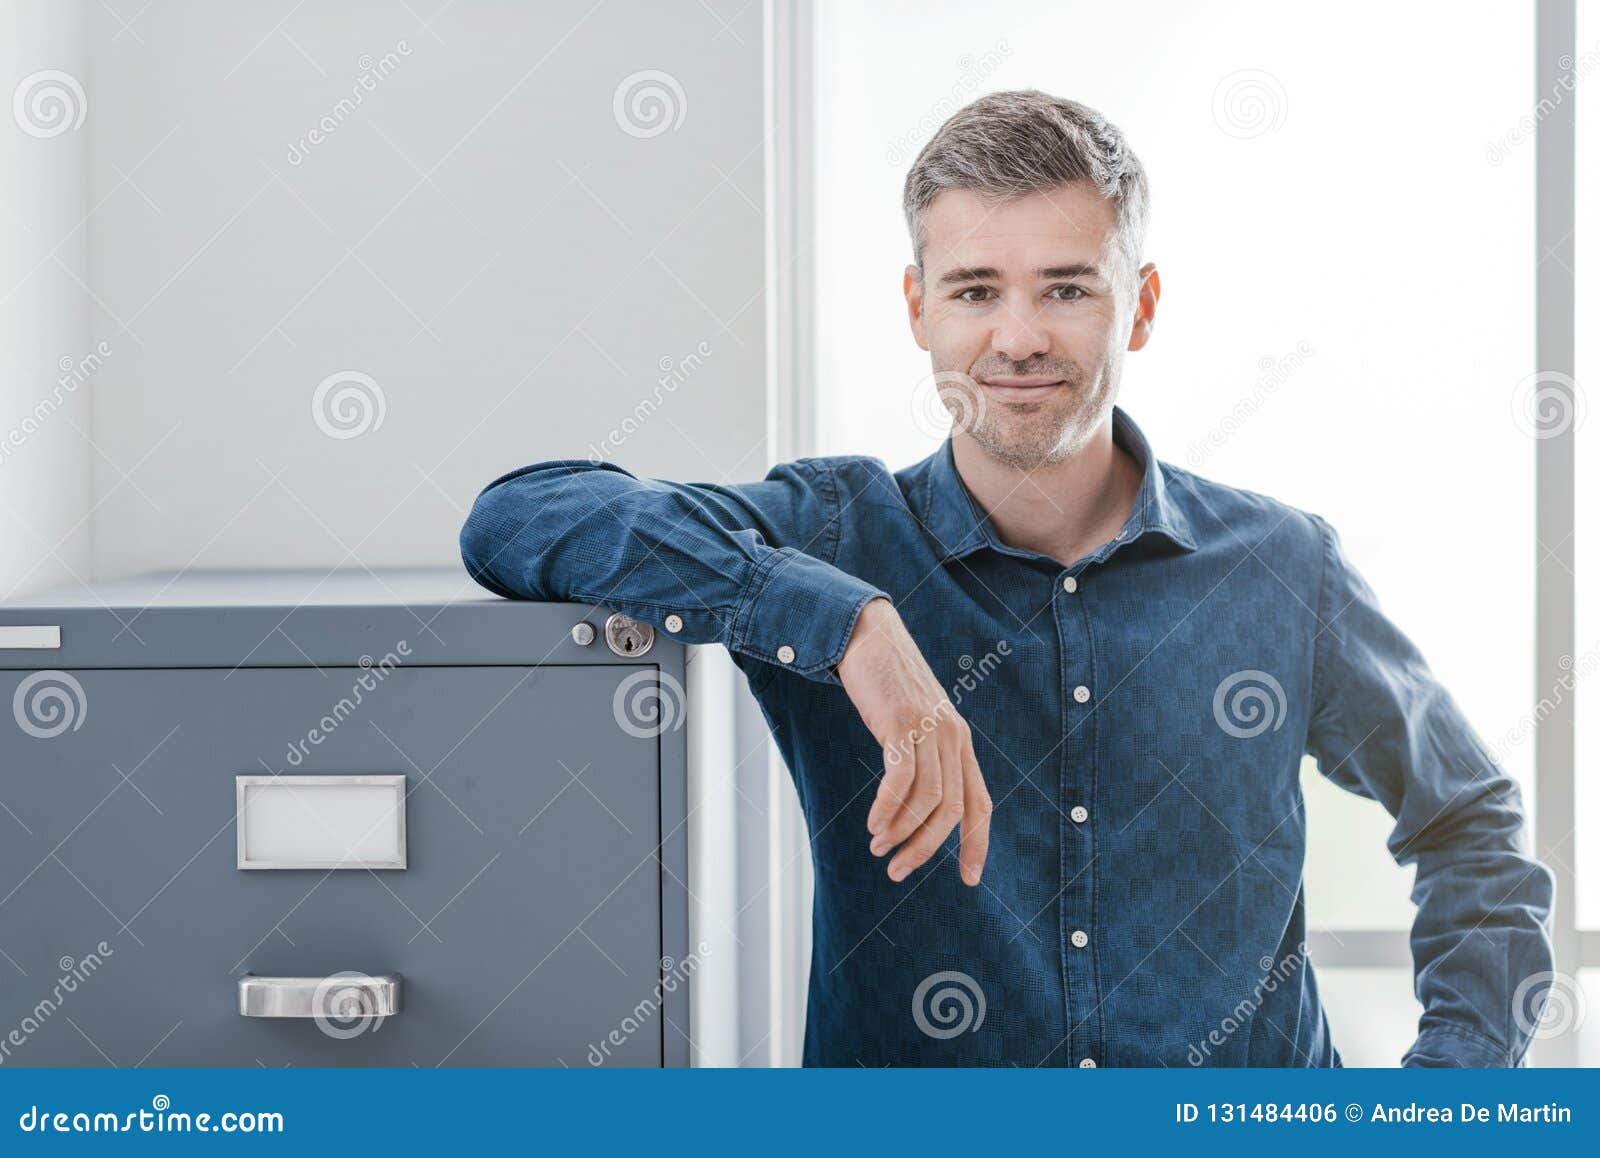 confident office worker smiling and leaning on the filing cabinet